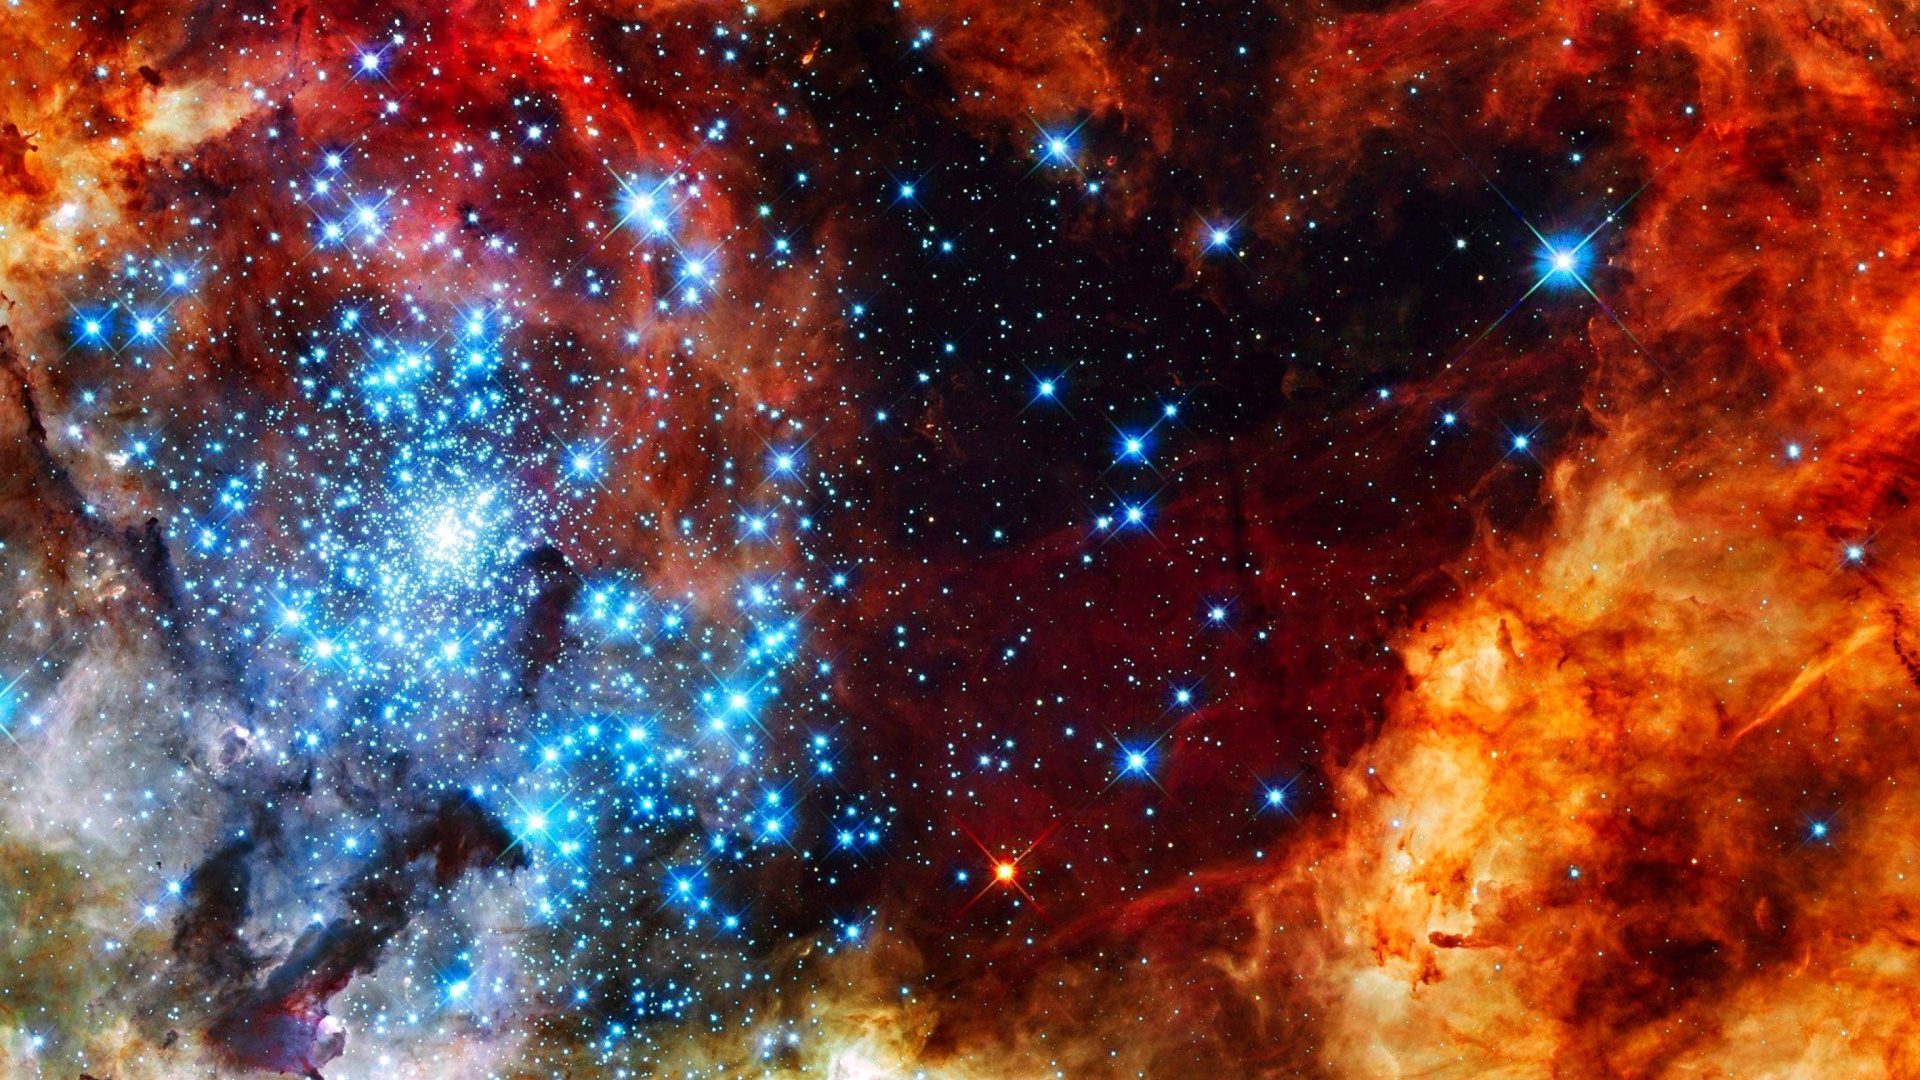 Starry Space wallpaper 1920x1080